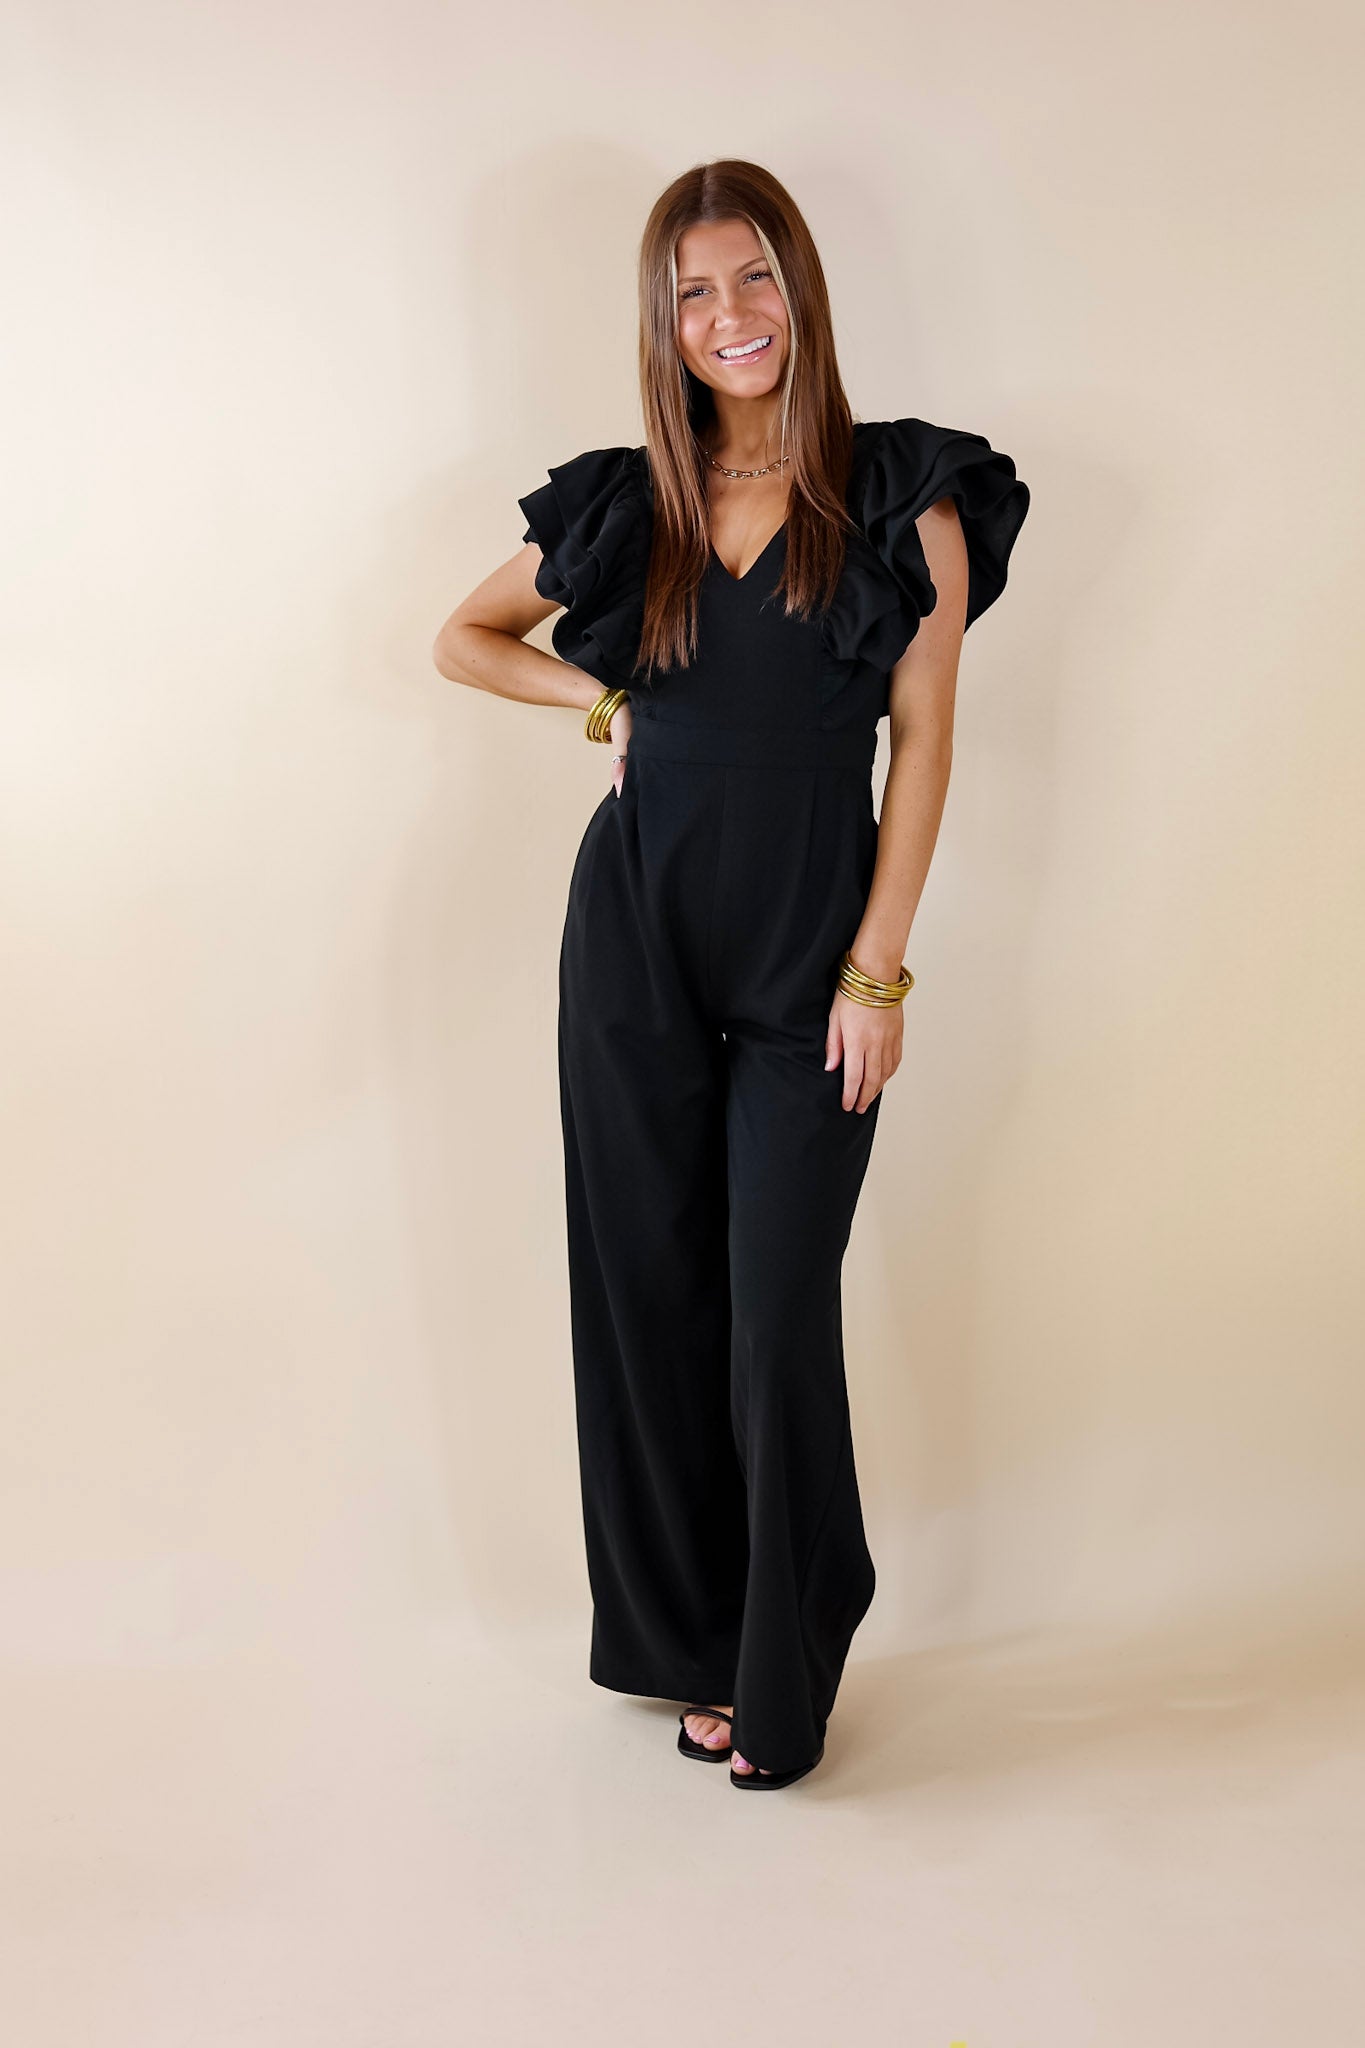 Superstar Style V Neck Jumpsuit with Ruffle Sleeves in Black - Giddy Up Glamour Boutique